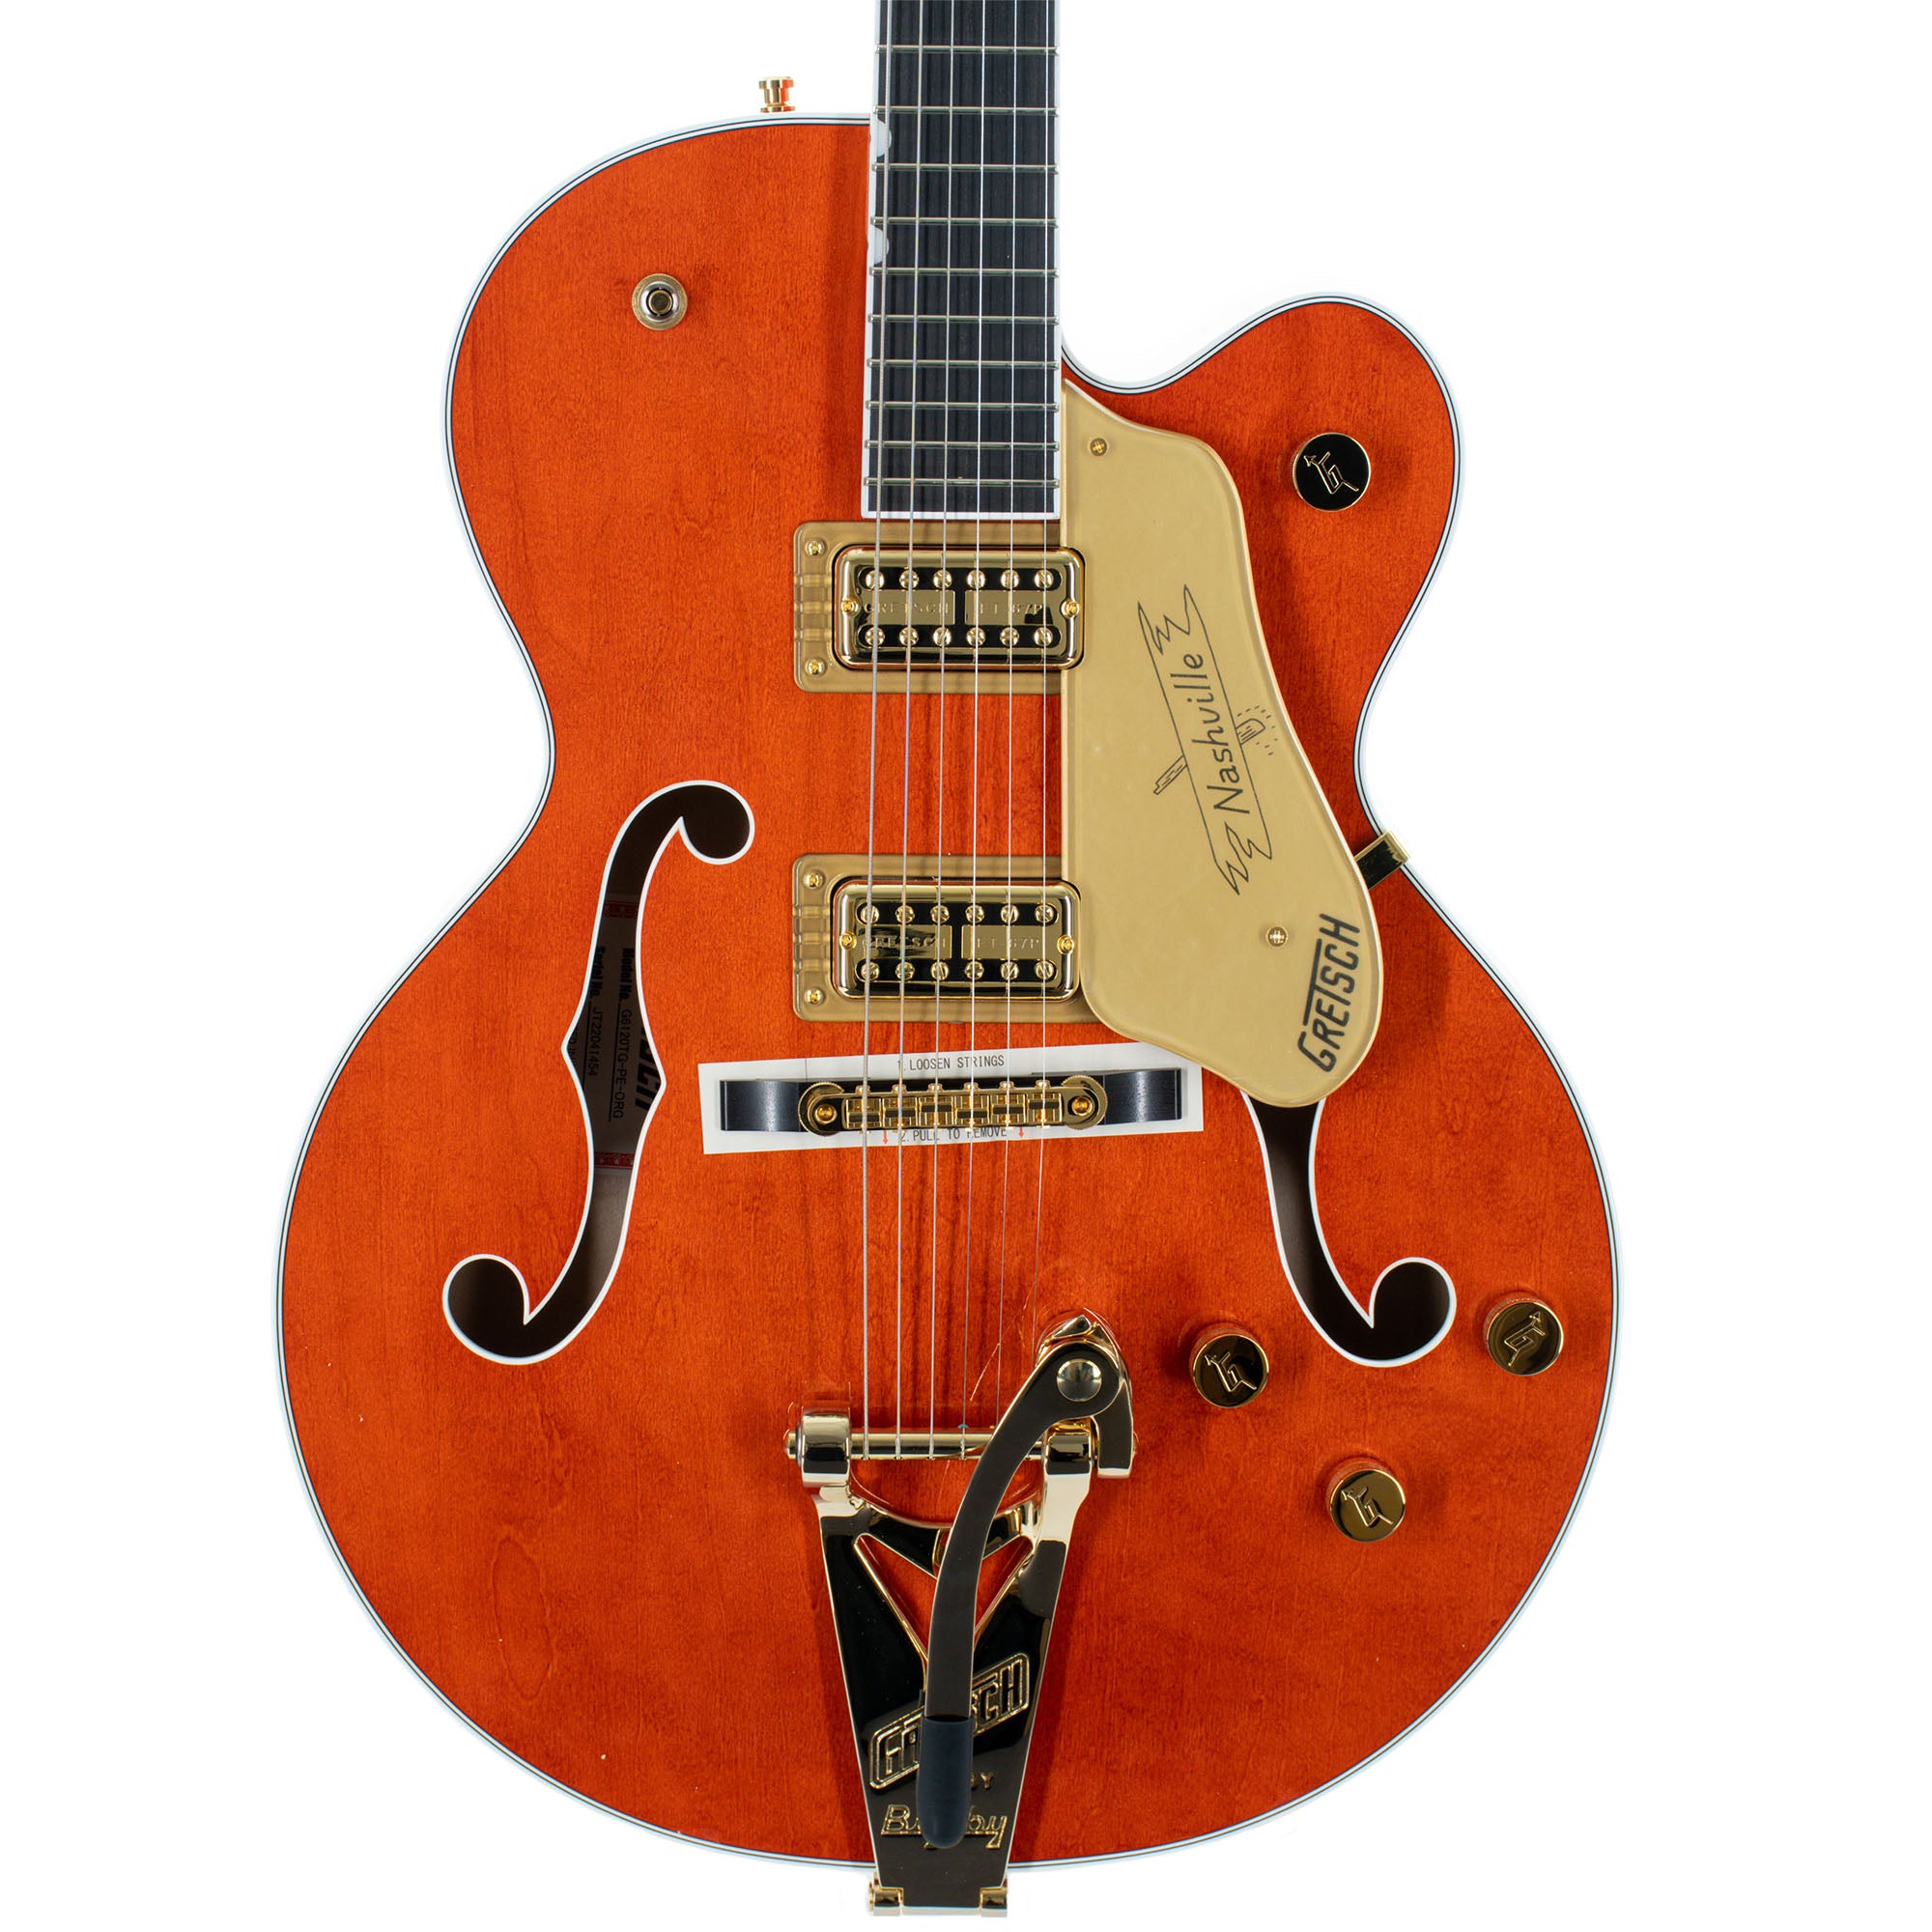 Gretsch G6120TG Players Edition Nashville Hollow Body Electric Guitar,